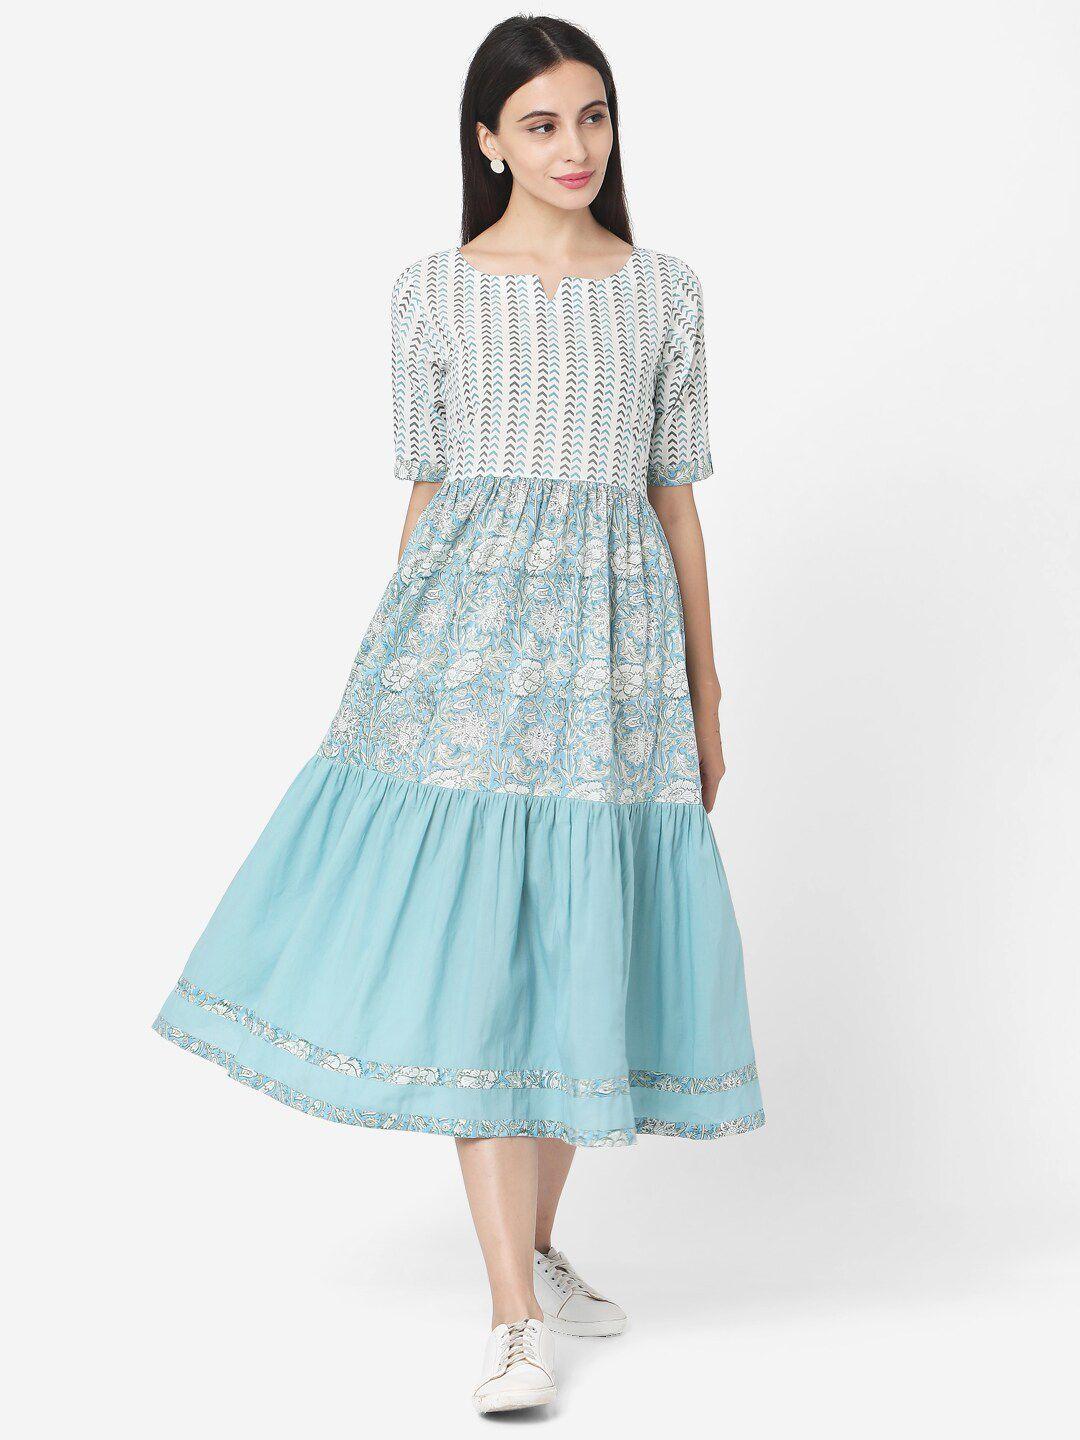 saanjh-women-white-printed-fit-and-flare-dress